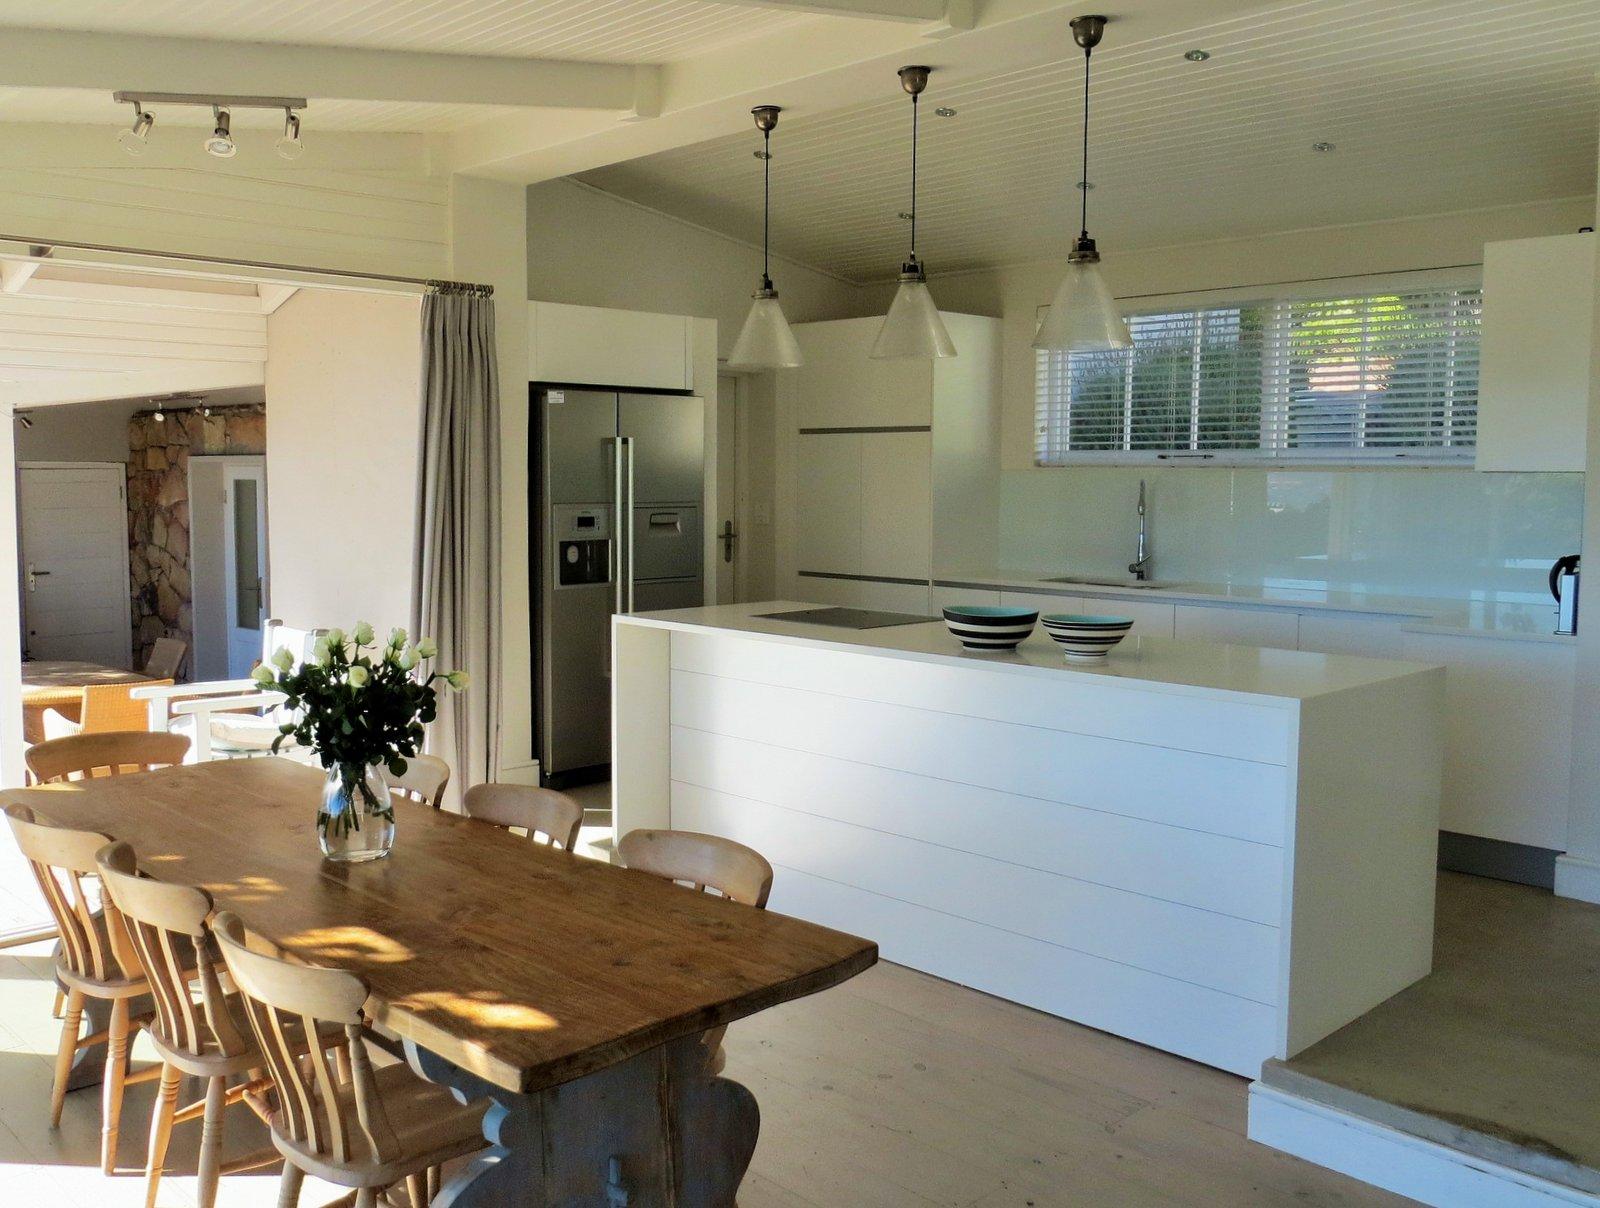 Photo 9 of Riverstone Villa accommodation in Hout Bay, Cape Town with 4 bedrooms and 3 bathrooms